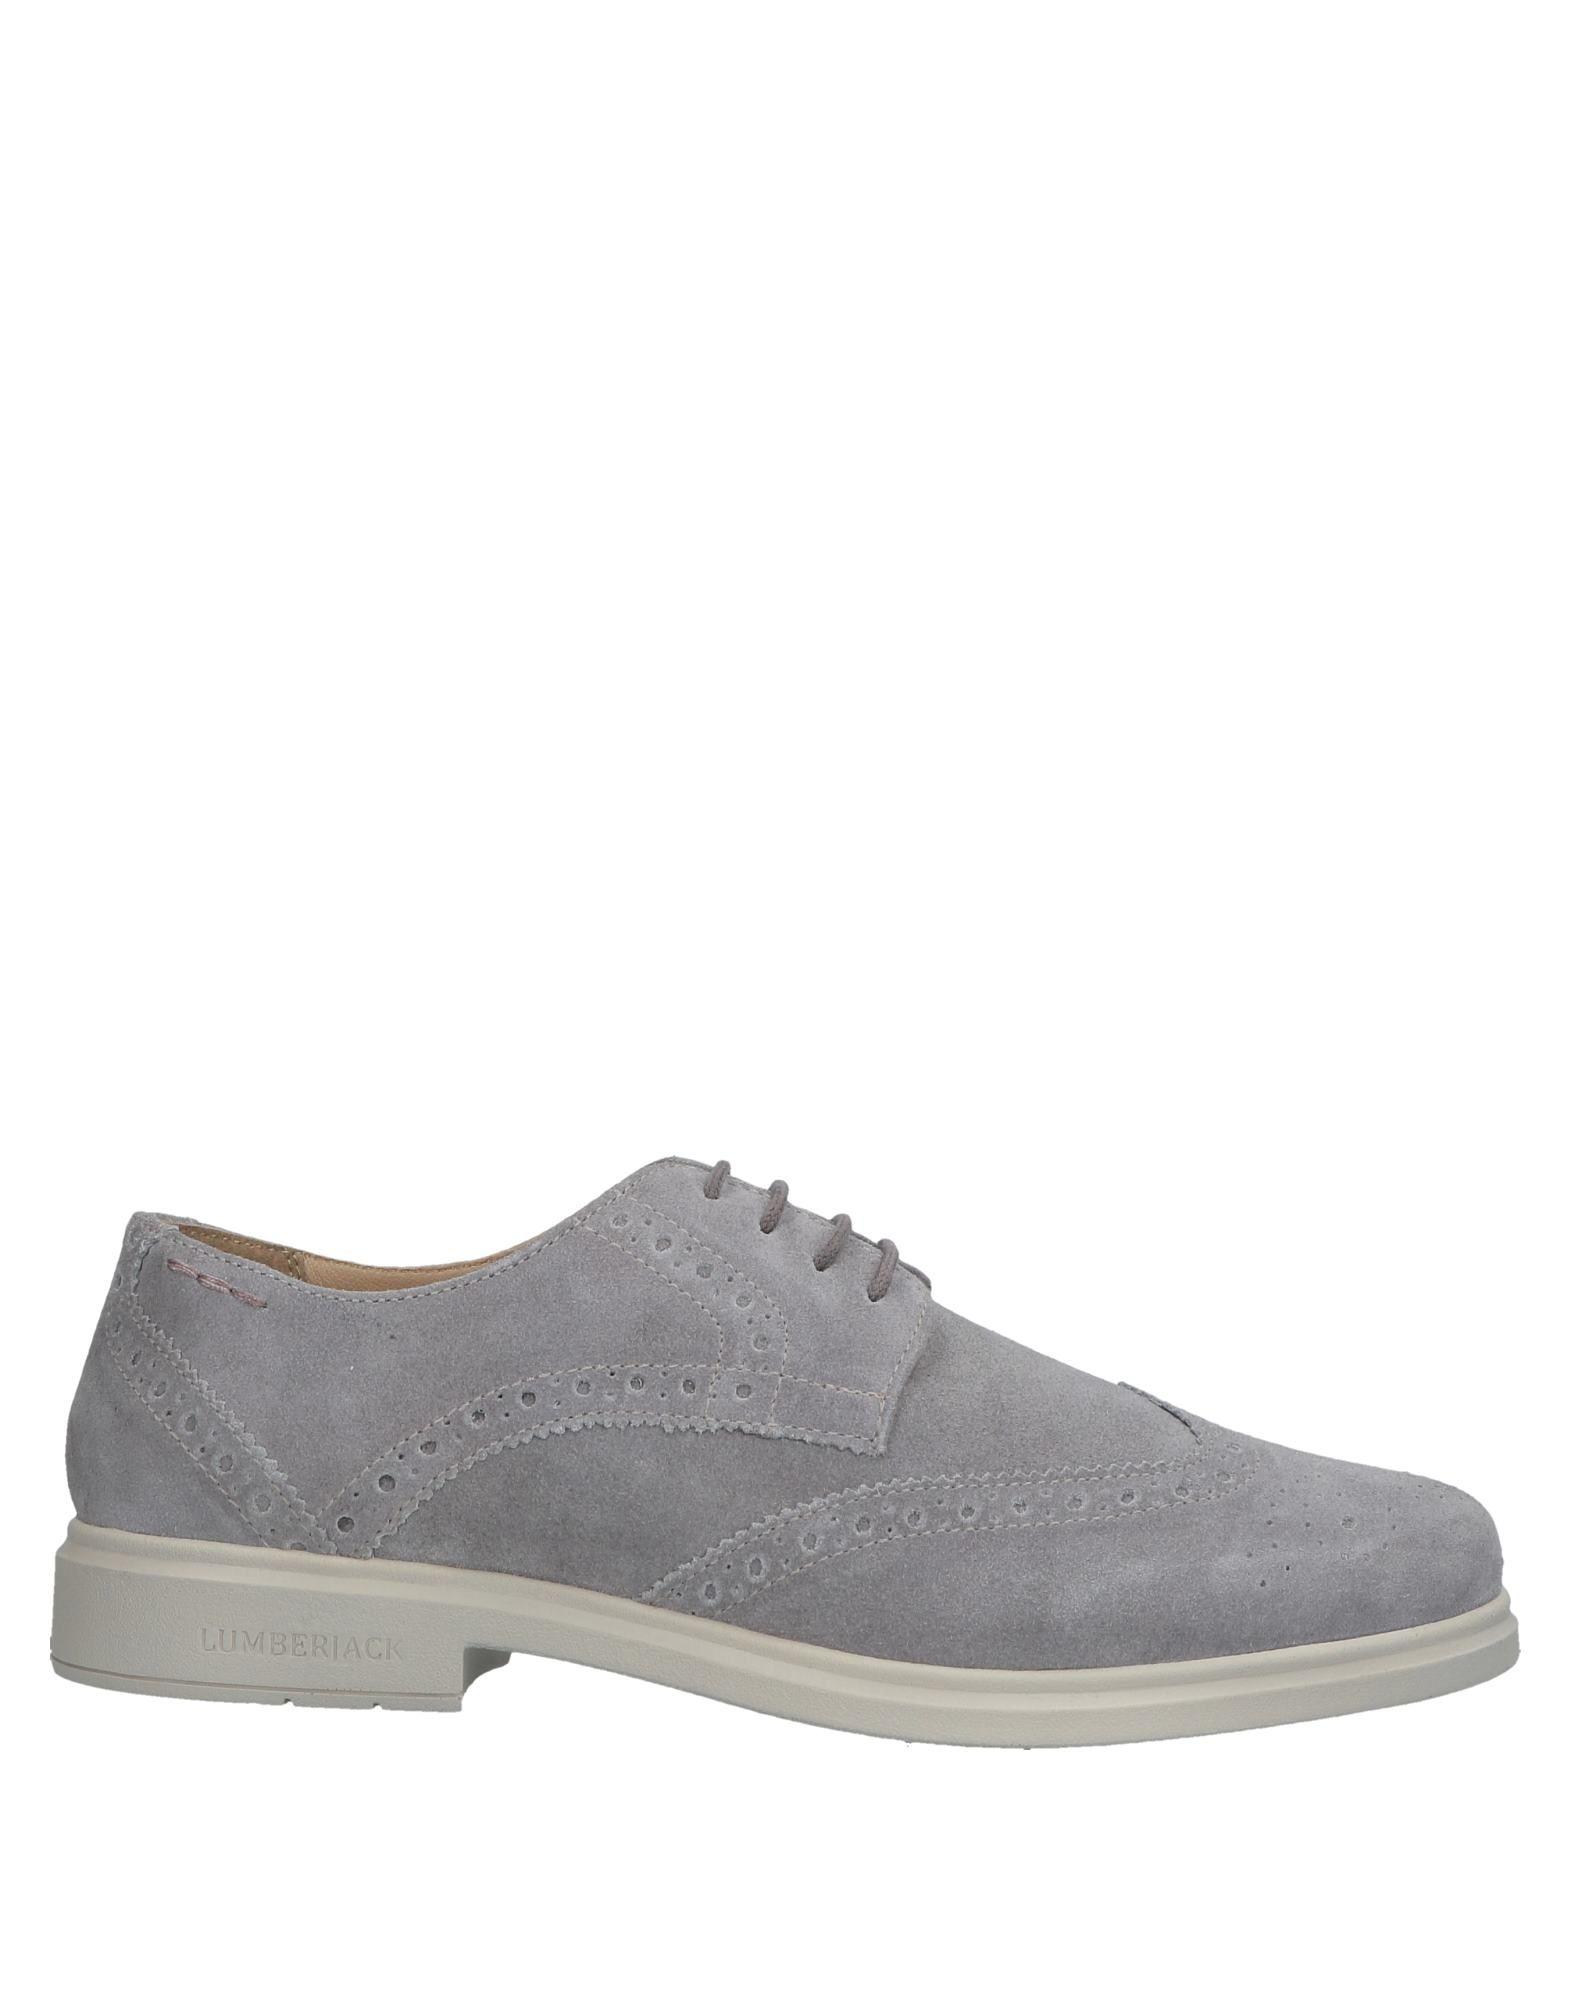 Lumberjack Suede Lace-up Shoe in Grey (Gray) for Men - Lyst